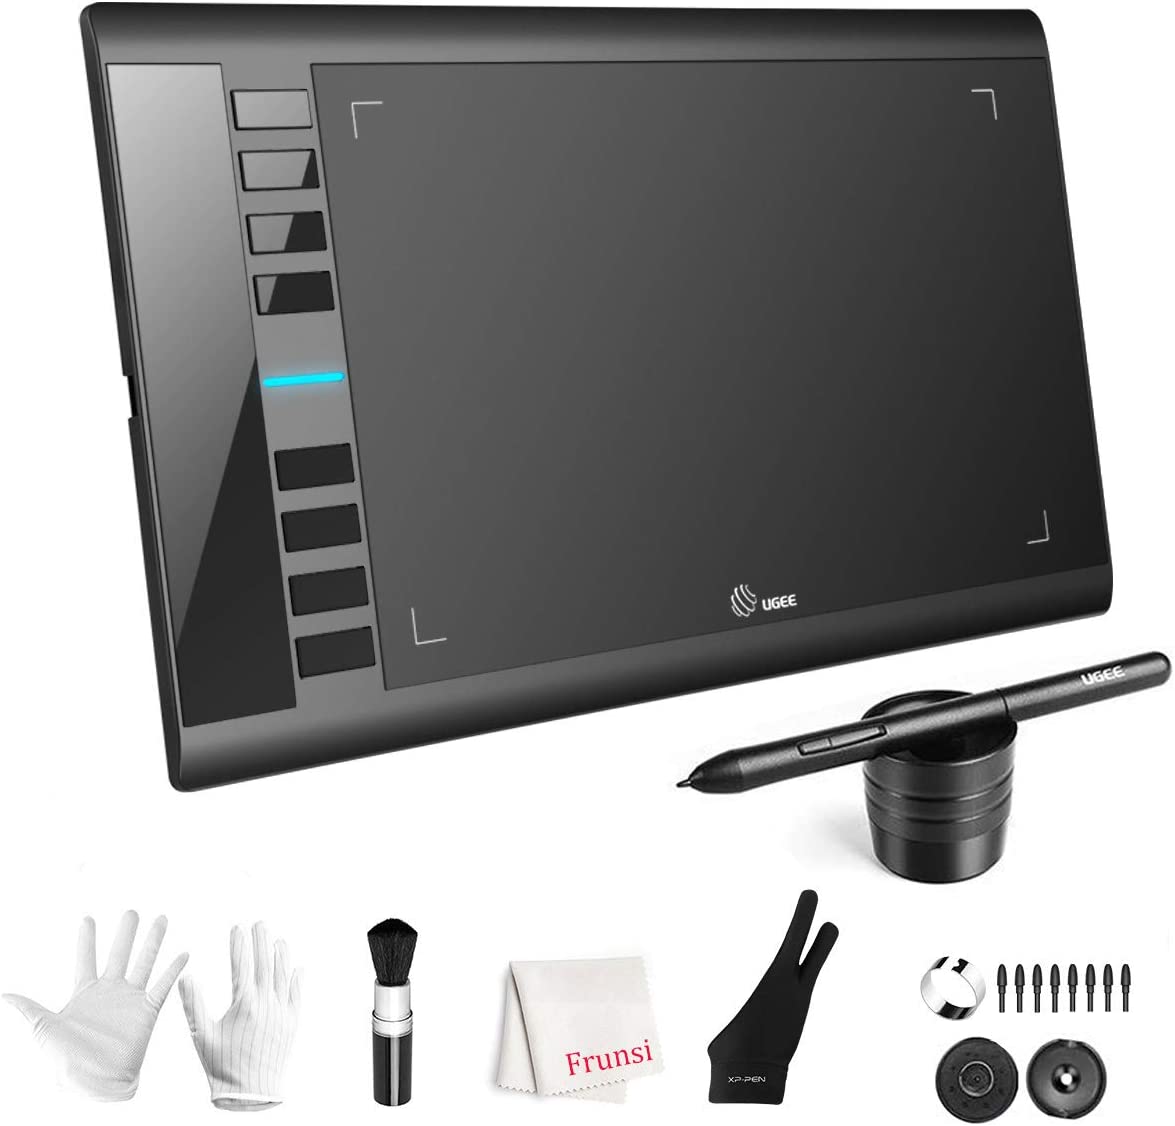 UGEE M708 10 x 6 inch Large Drawing Tablet with 8 Hot [...]